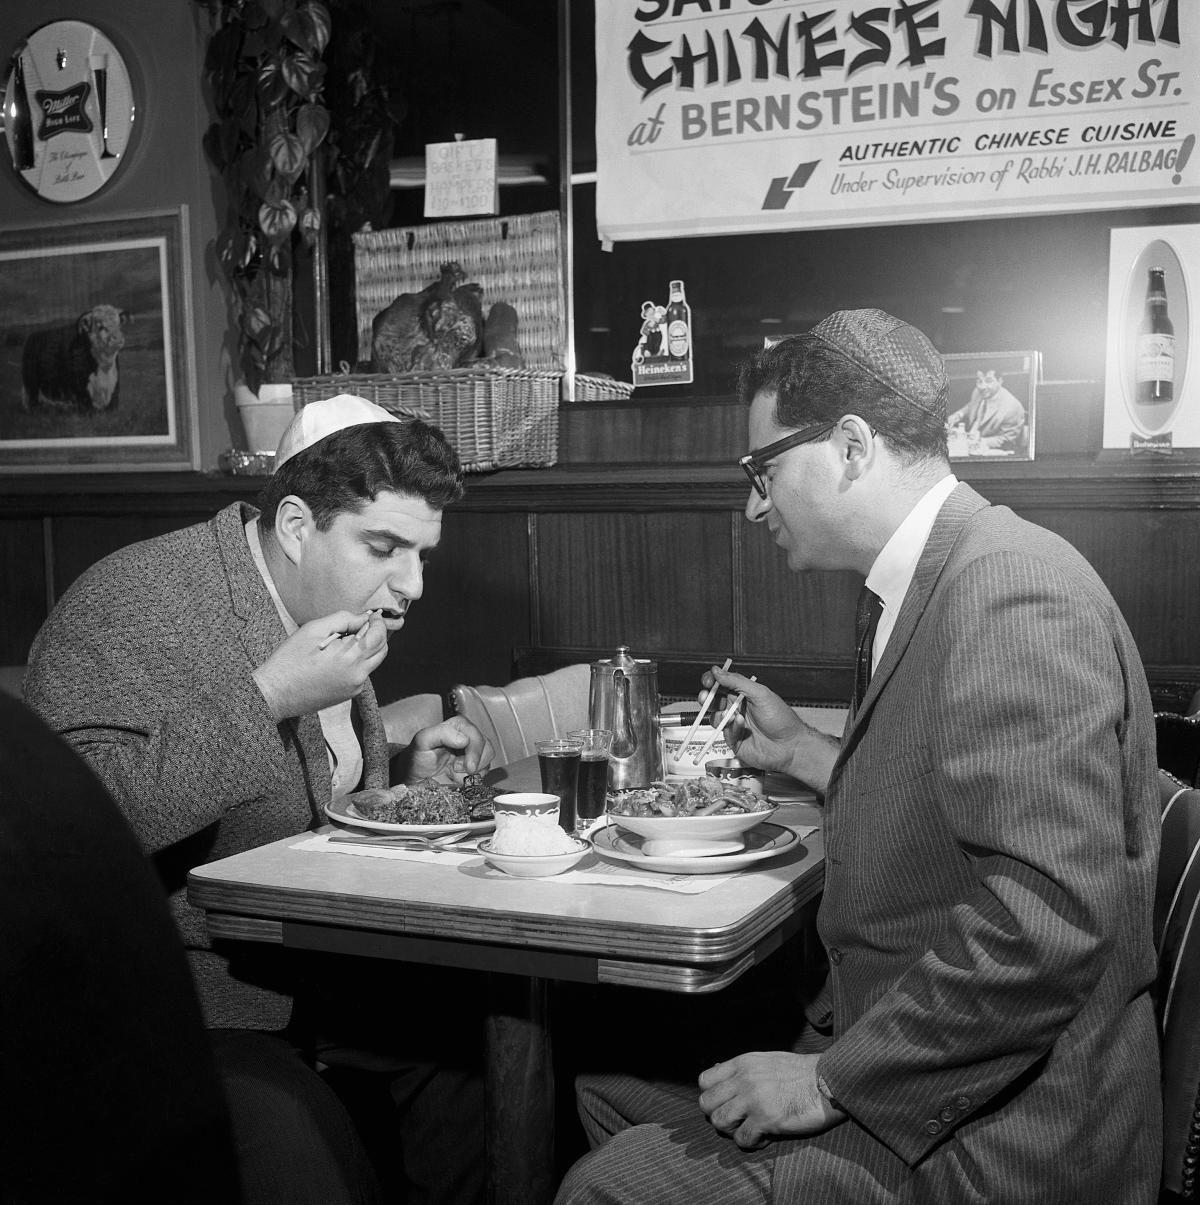 Two men wearing yarmulkes sit at a diner table, eating chinese food with chopsticks